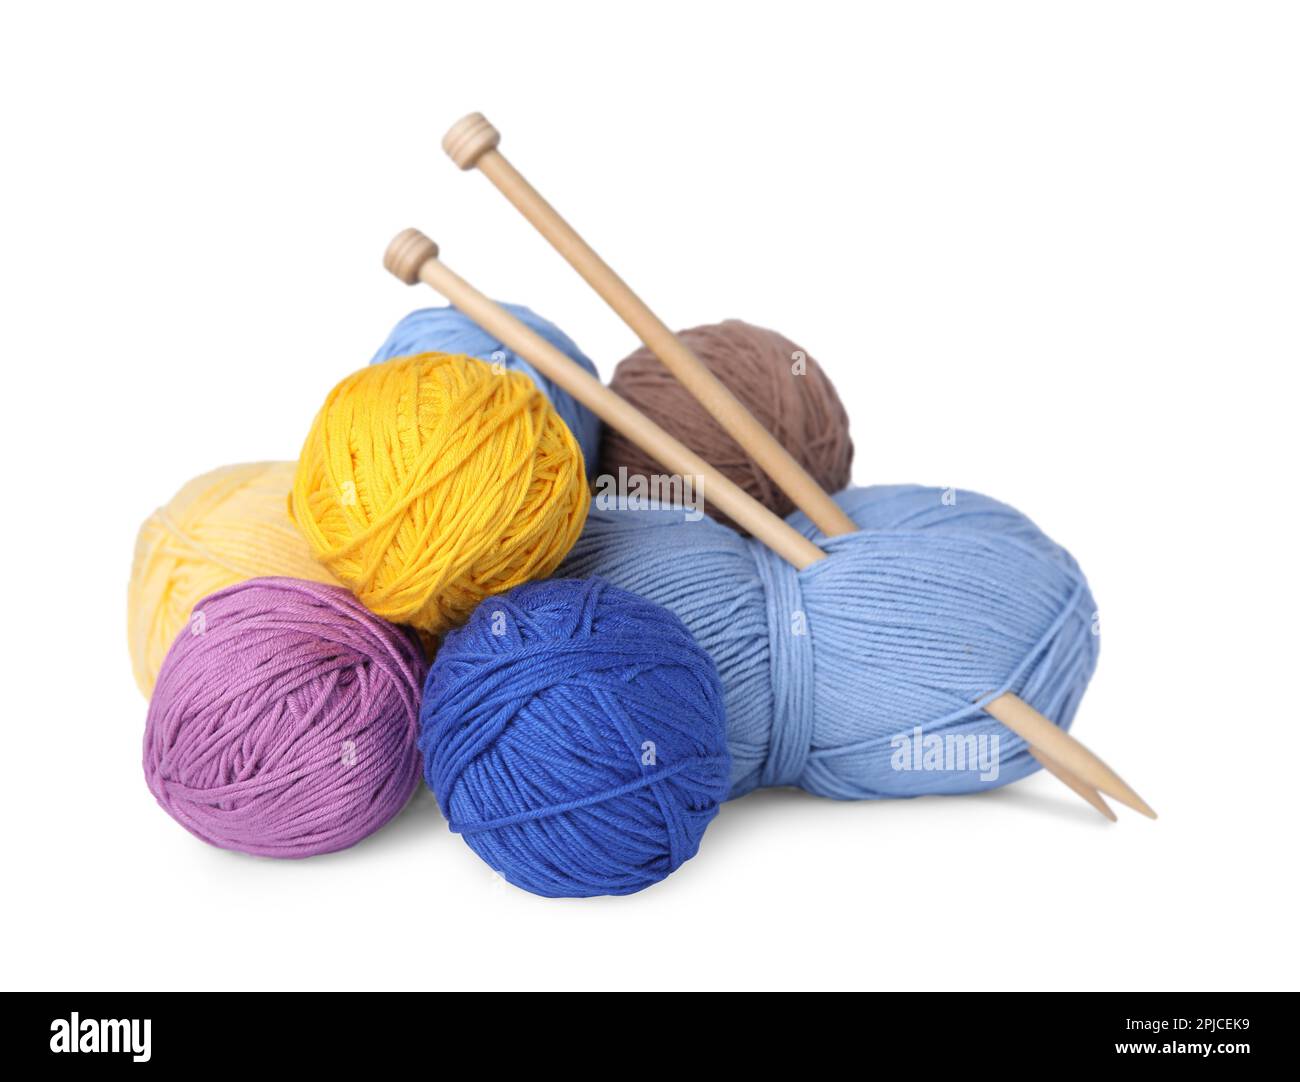 Wool Clews With Knitting Needles Woolen Roll Balls Skein Threads Stock  Photo, Picture and Royalty Free Image. Image 40010256.